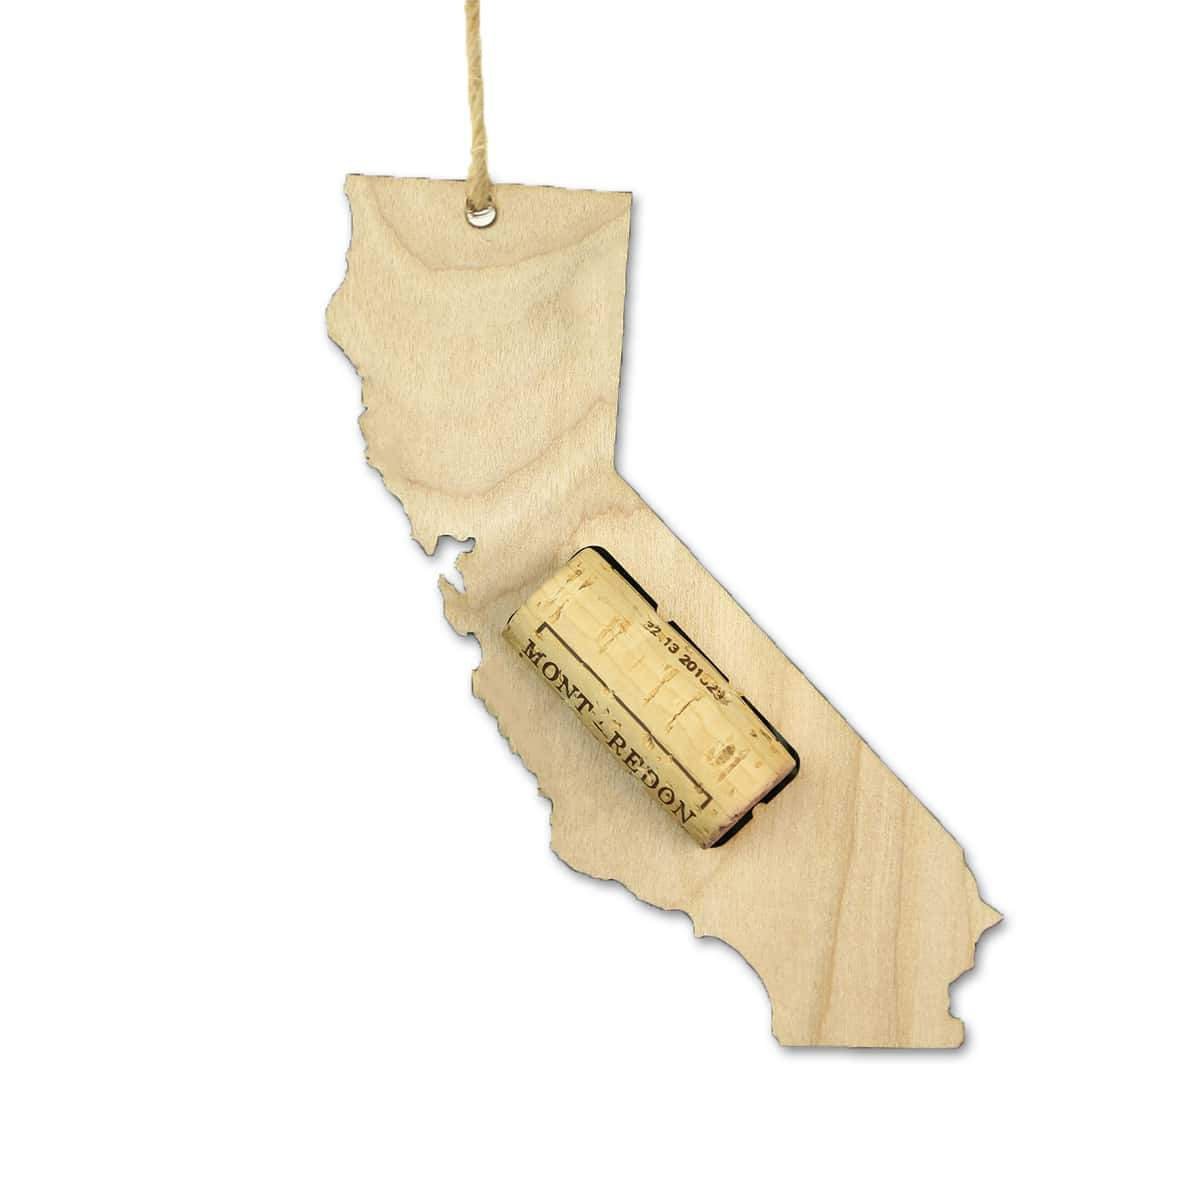 Torched Products Wine Cork Holder California Wine Cork Holder Ornaments (781195837557)